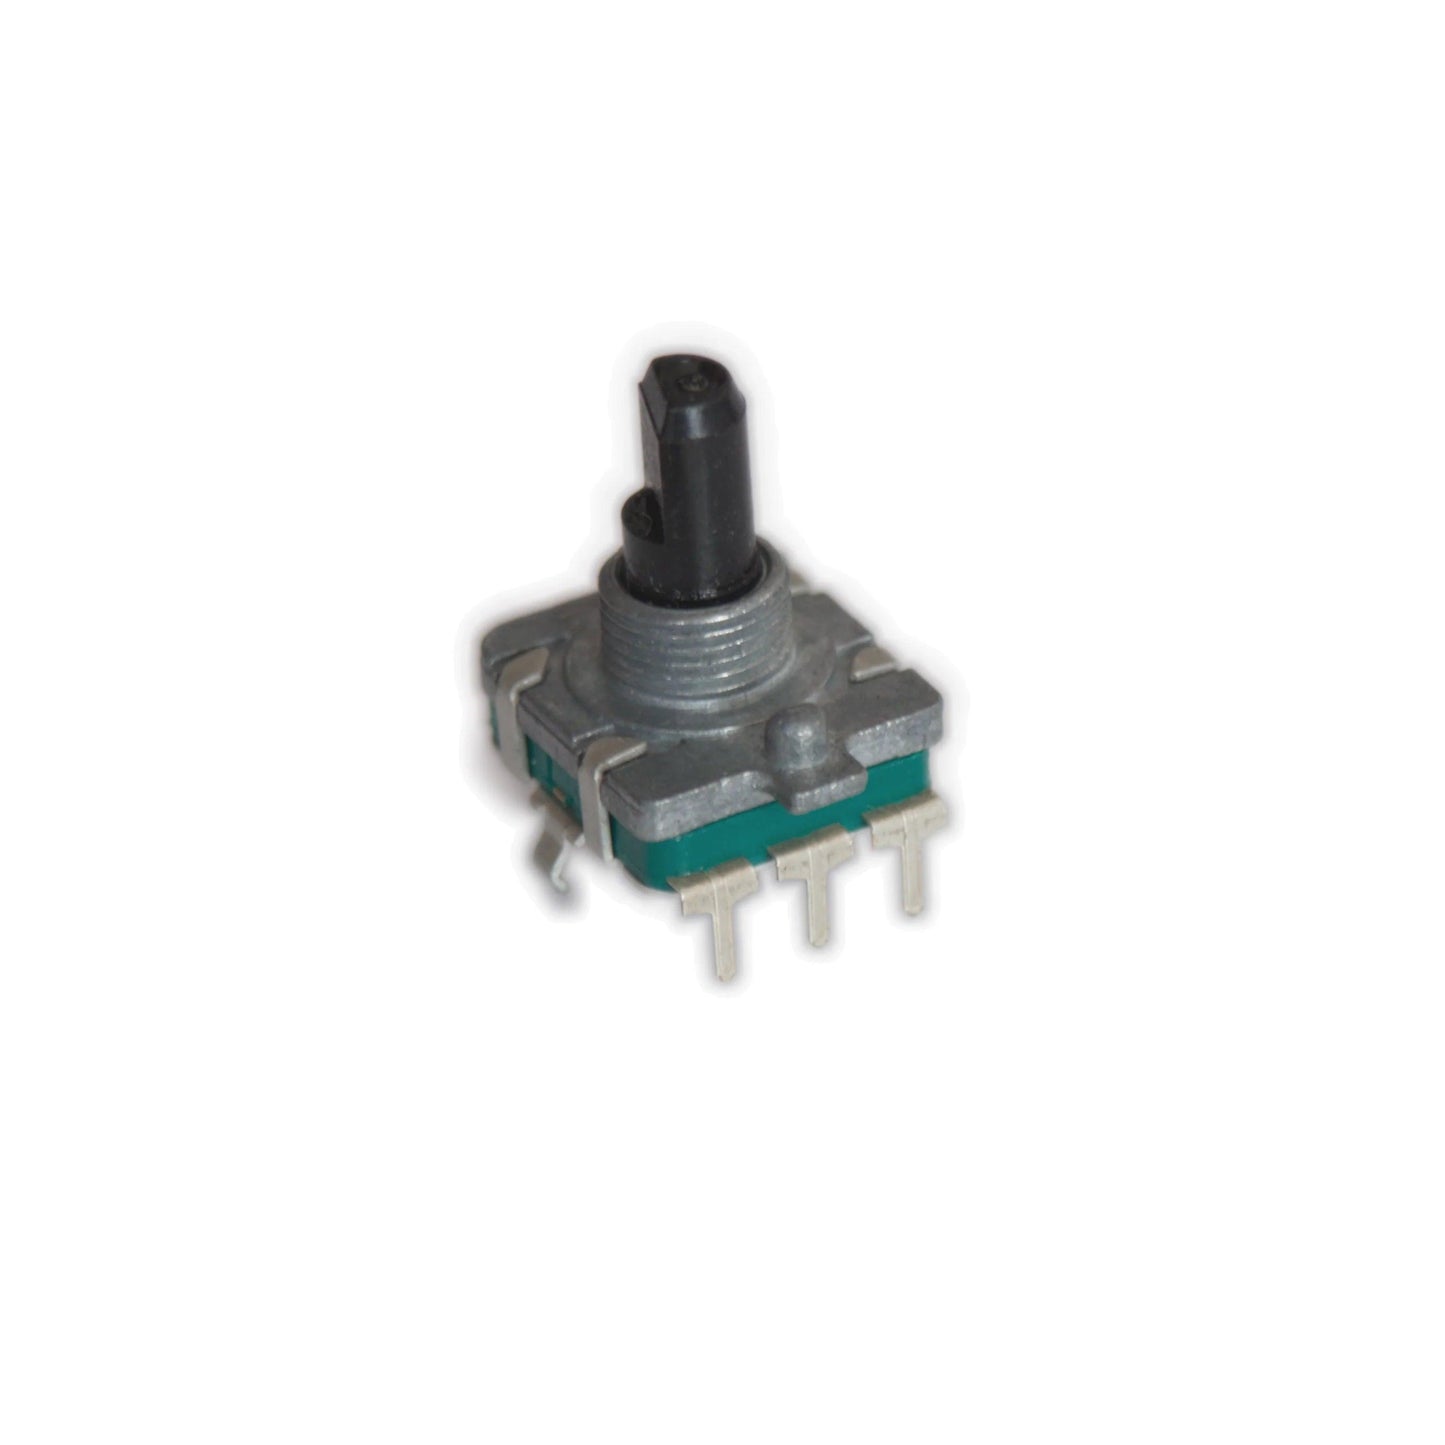 Korg - iS35 , iS40 - Rotary encoder - synthesizer-parts.com